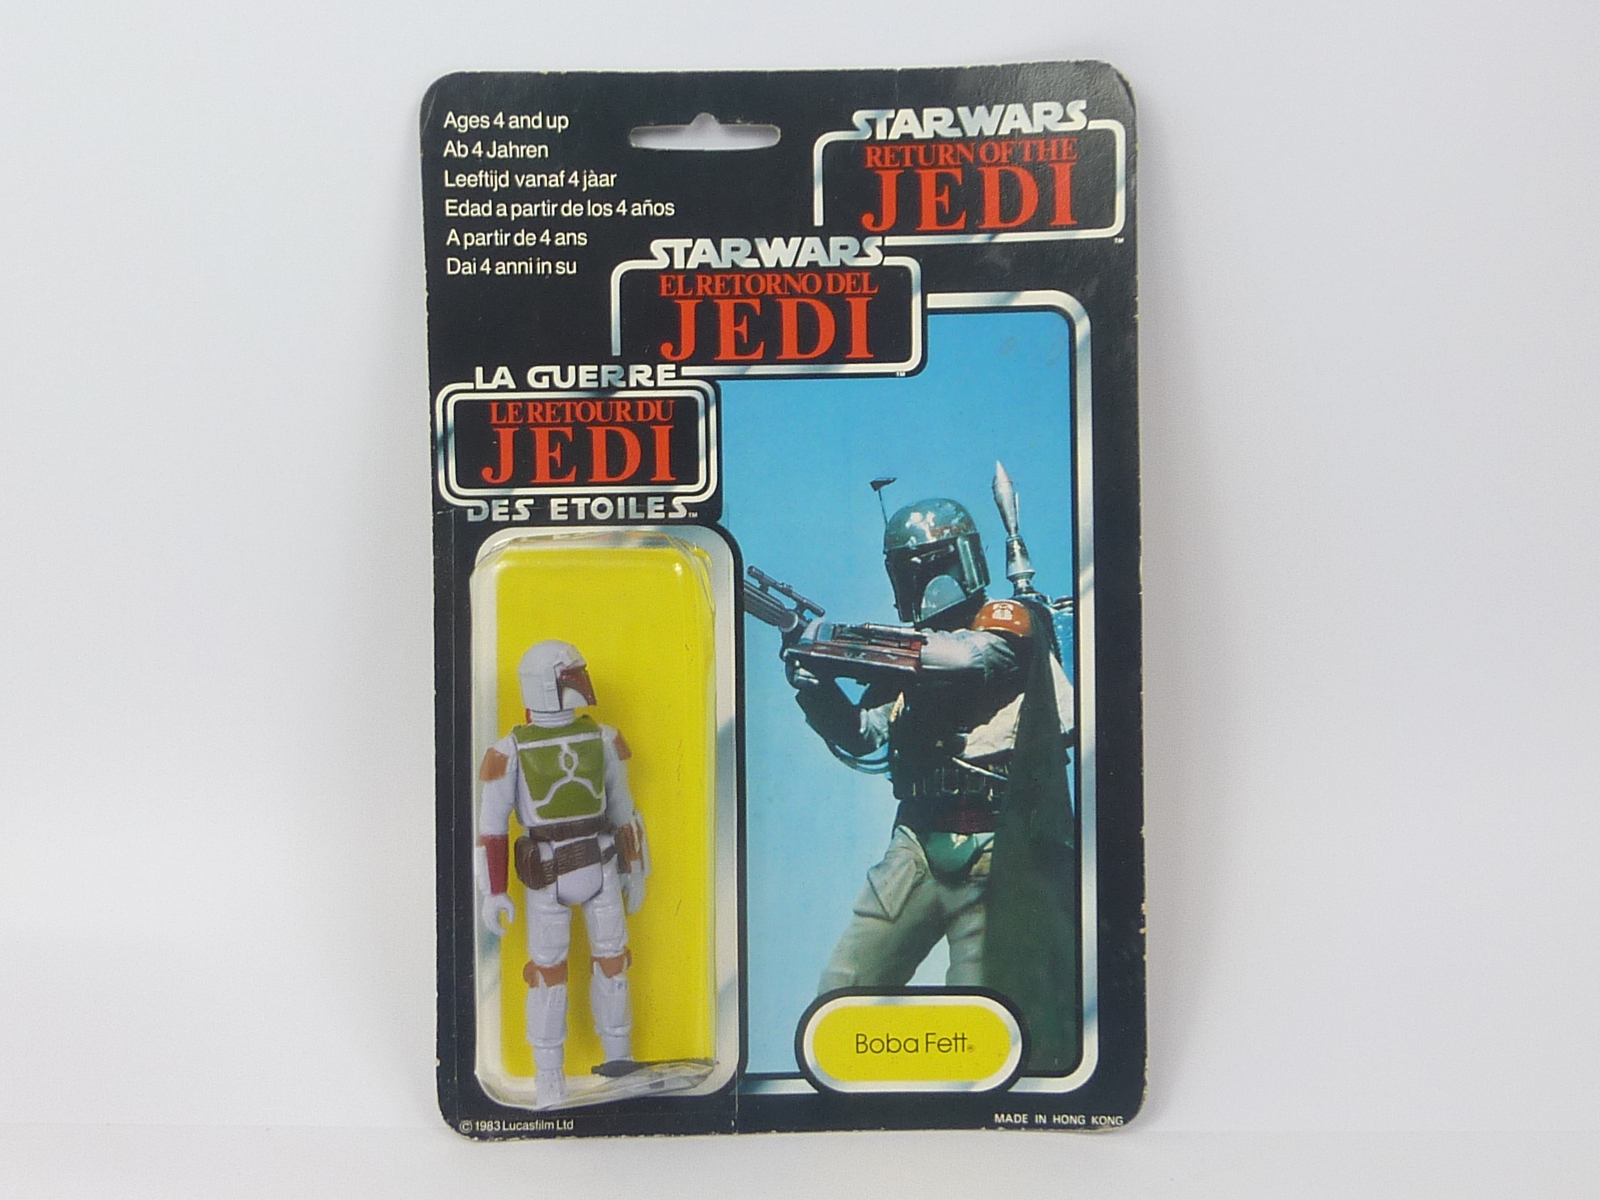 Palitoy of General Mills, Star Wars The Return of the Jedi, Trilogo, Boba Fett figure. - Image 3 of 10